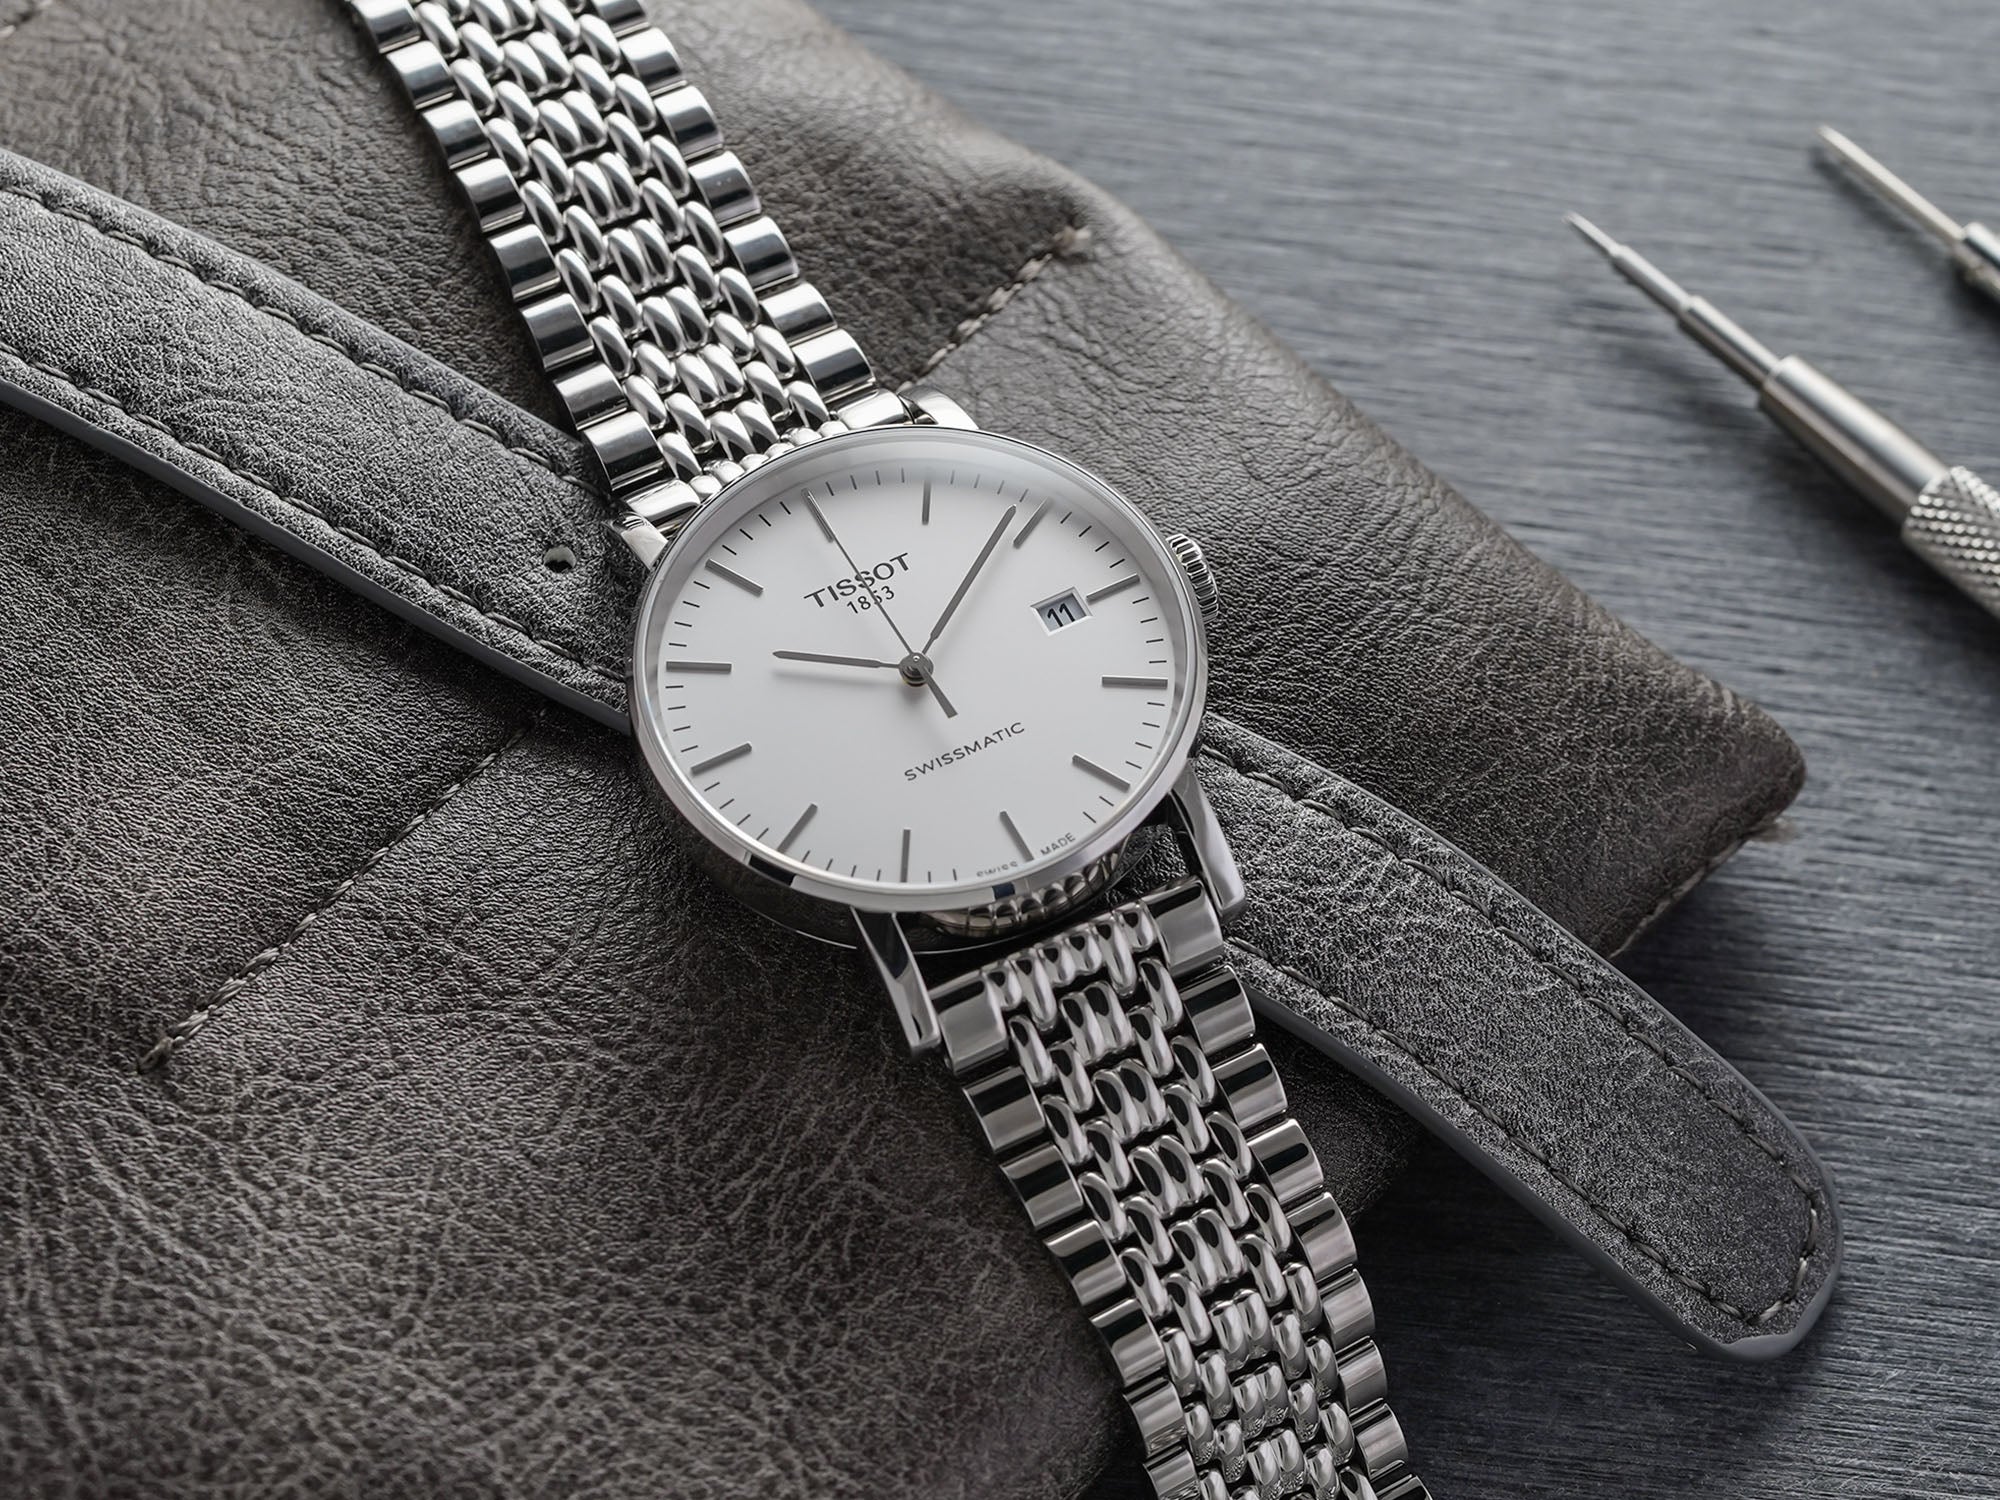 Orient's Dress Watches Deliver Exceptional Design At Exceptional Prices